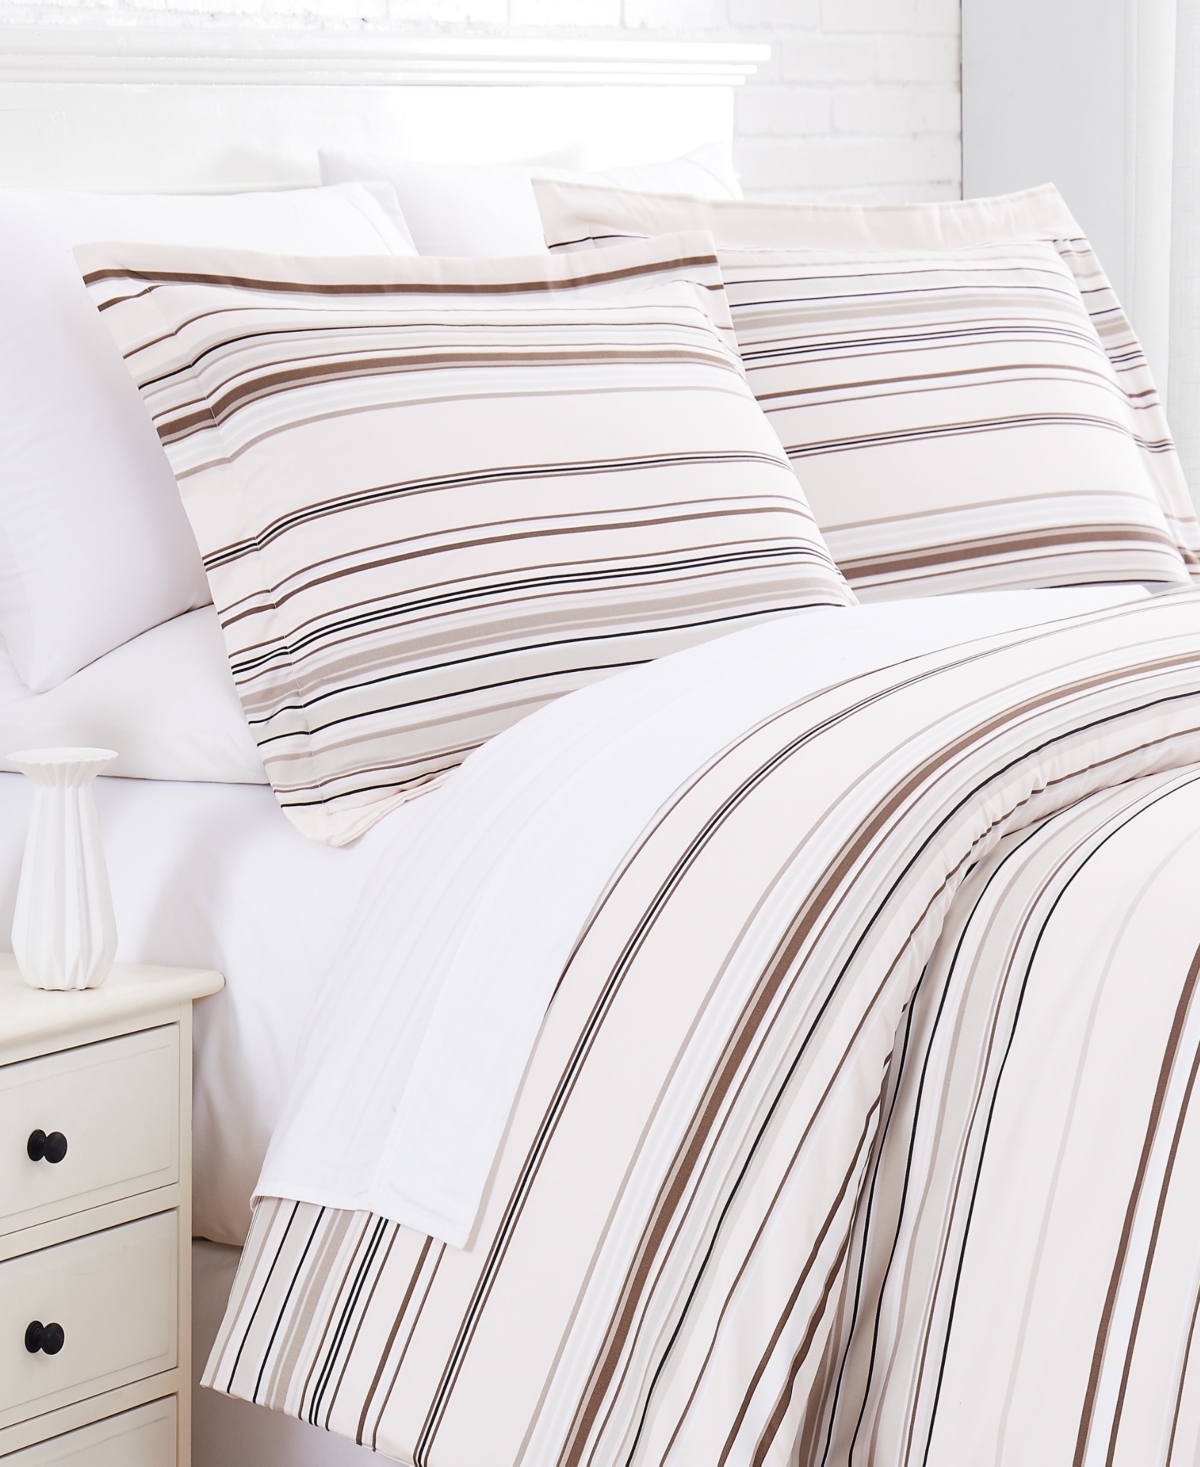 Southshore Fine Linens Stripe 3 Piece Comforter And Sham Set, King In Taupe